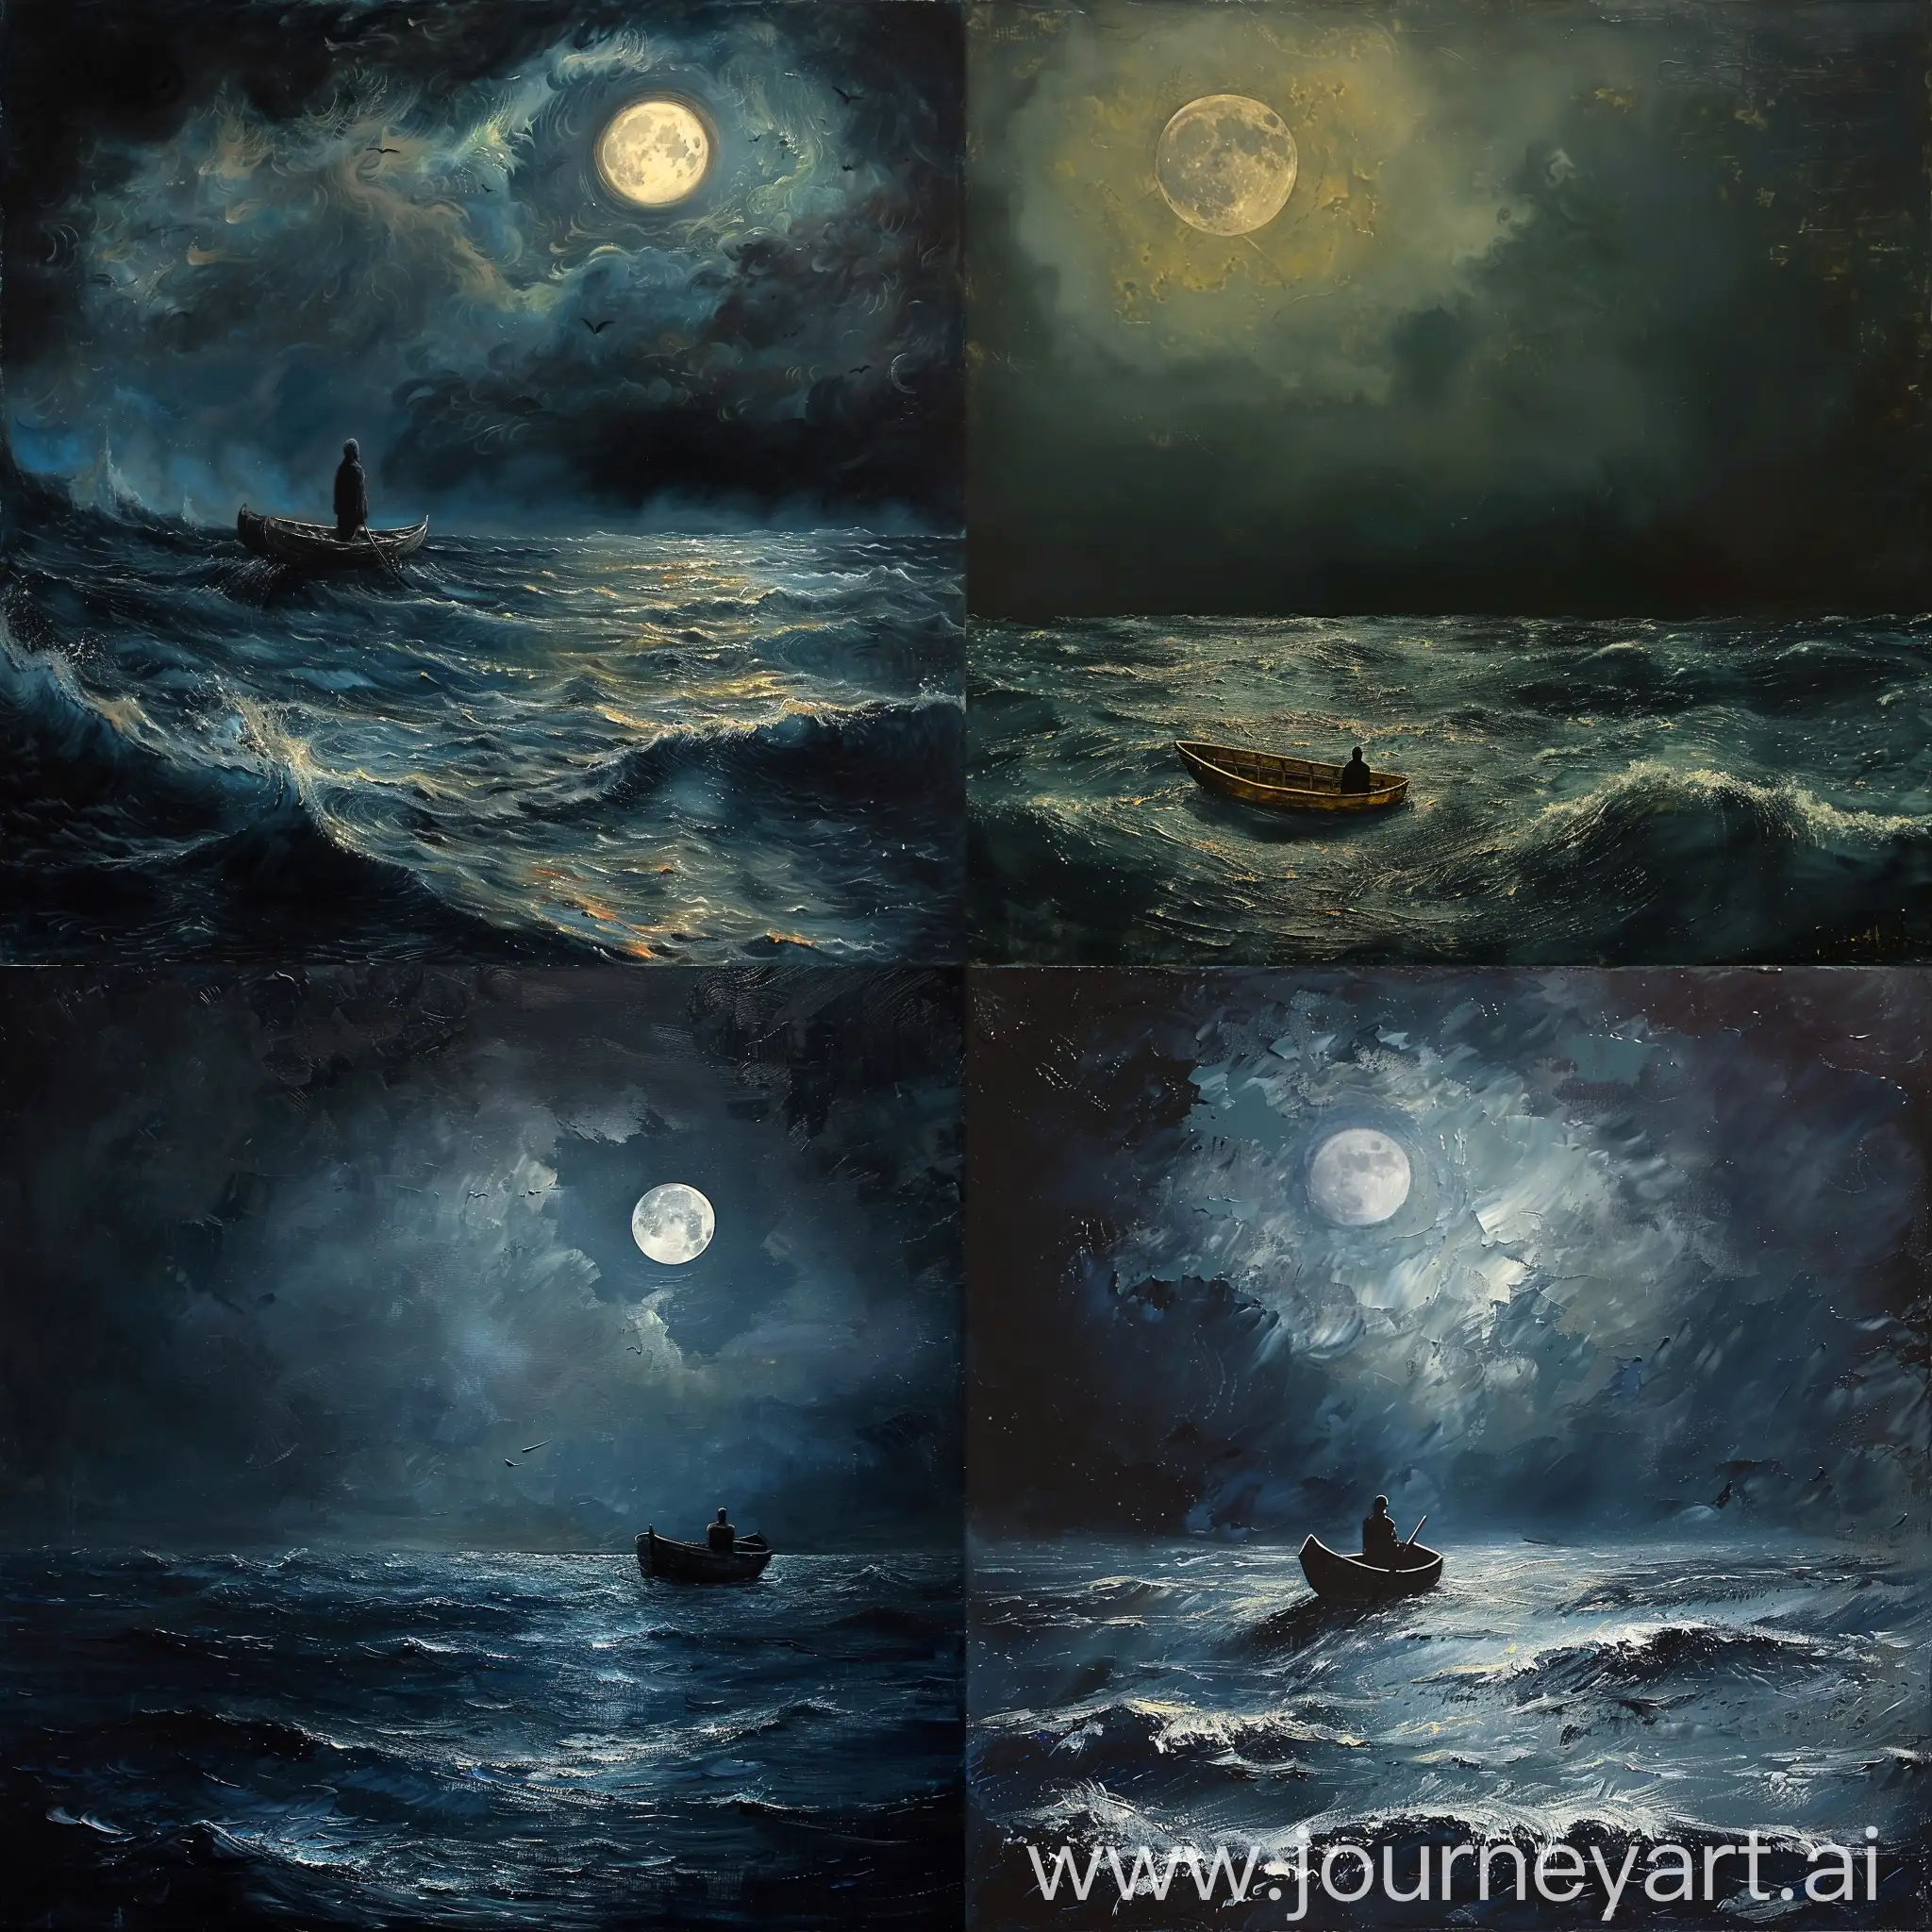 Solitary-Sailor-Confronting-the-Moon-in-Dark-Stormy-Ocean